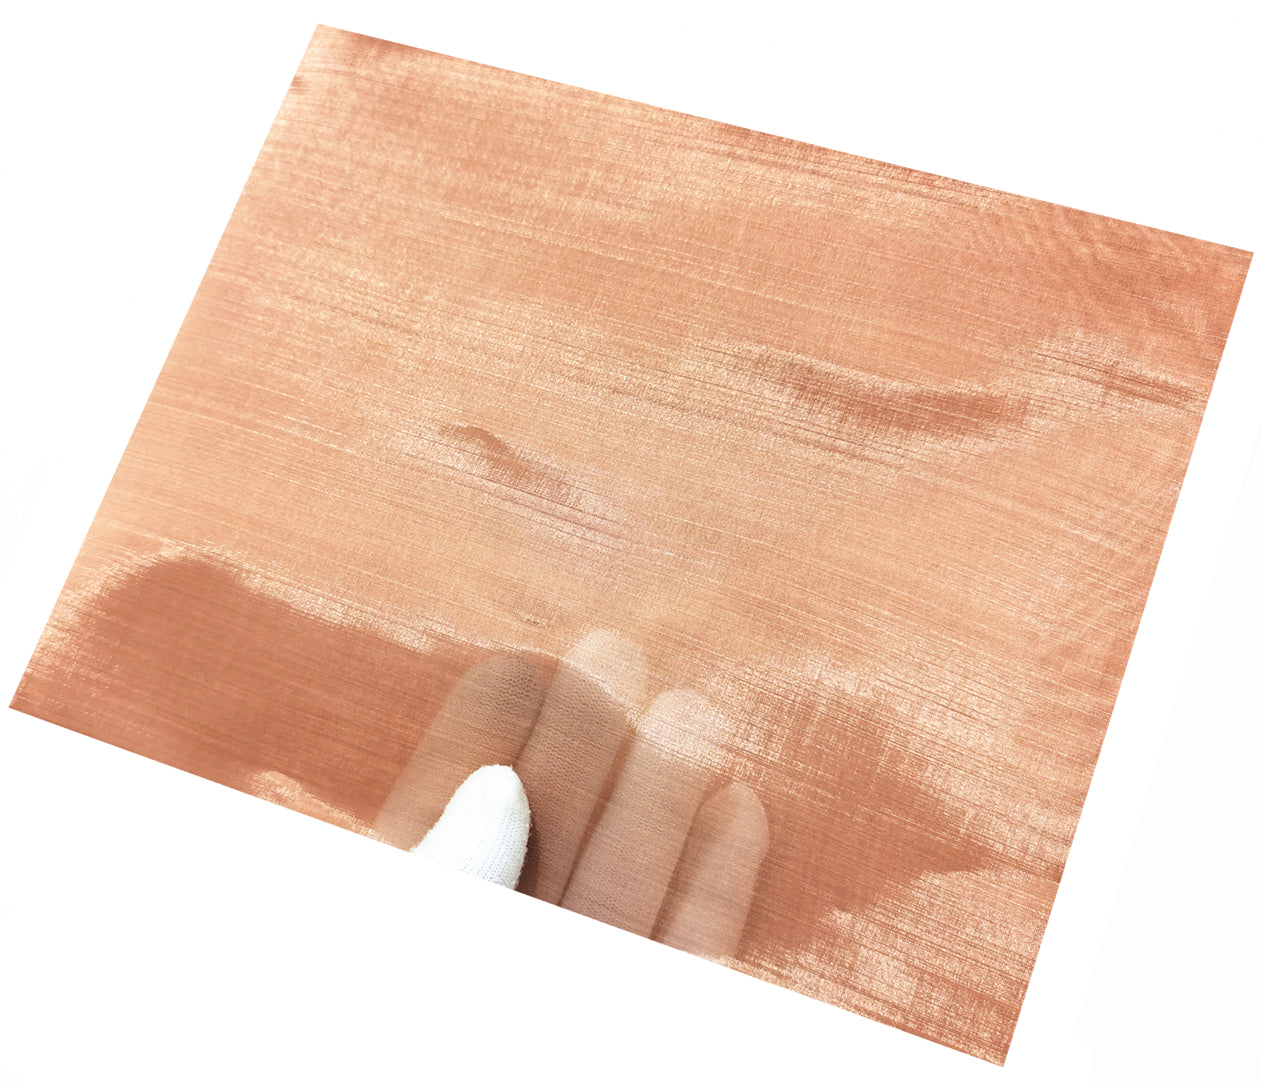 Pure Copper Mesh Dense Filter Virus Proof Anti Bacteria Breathable Fabric Sheets for Mask